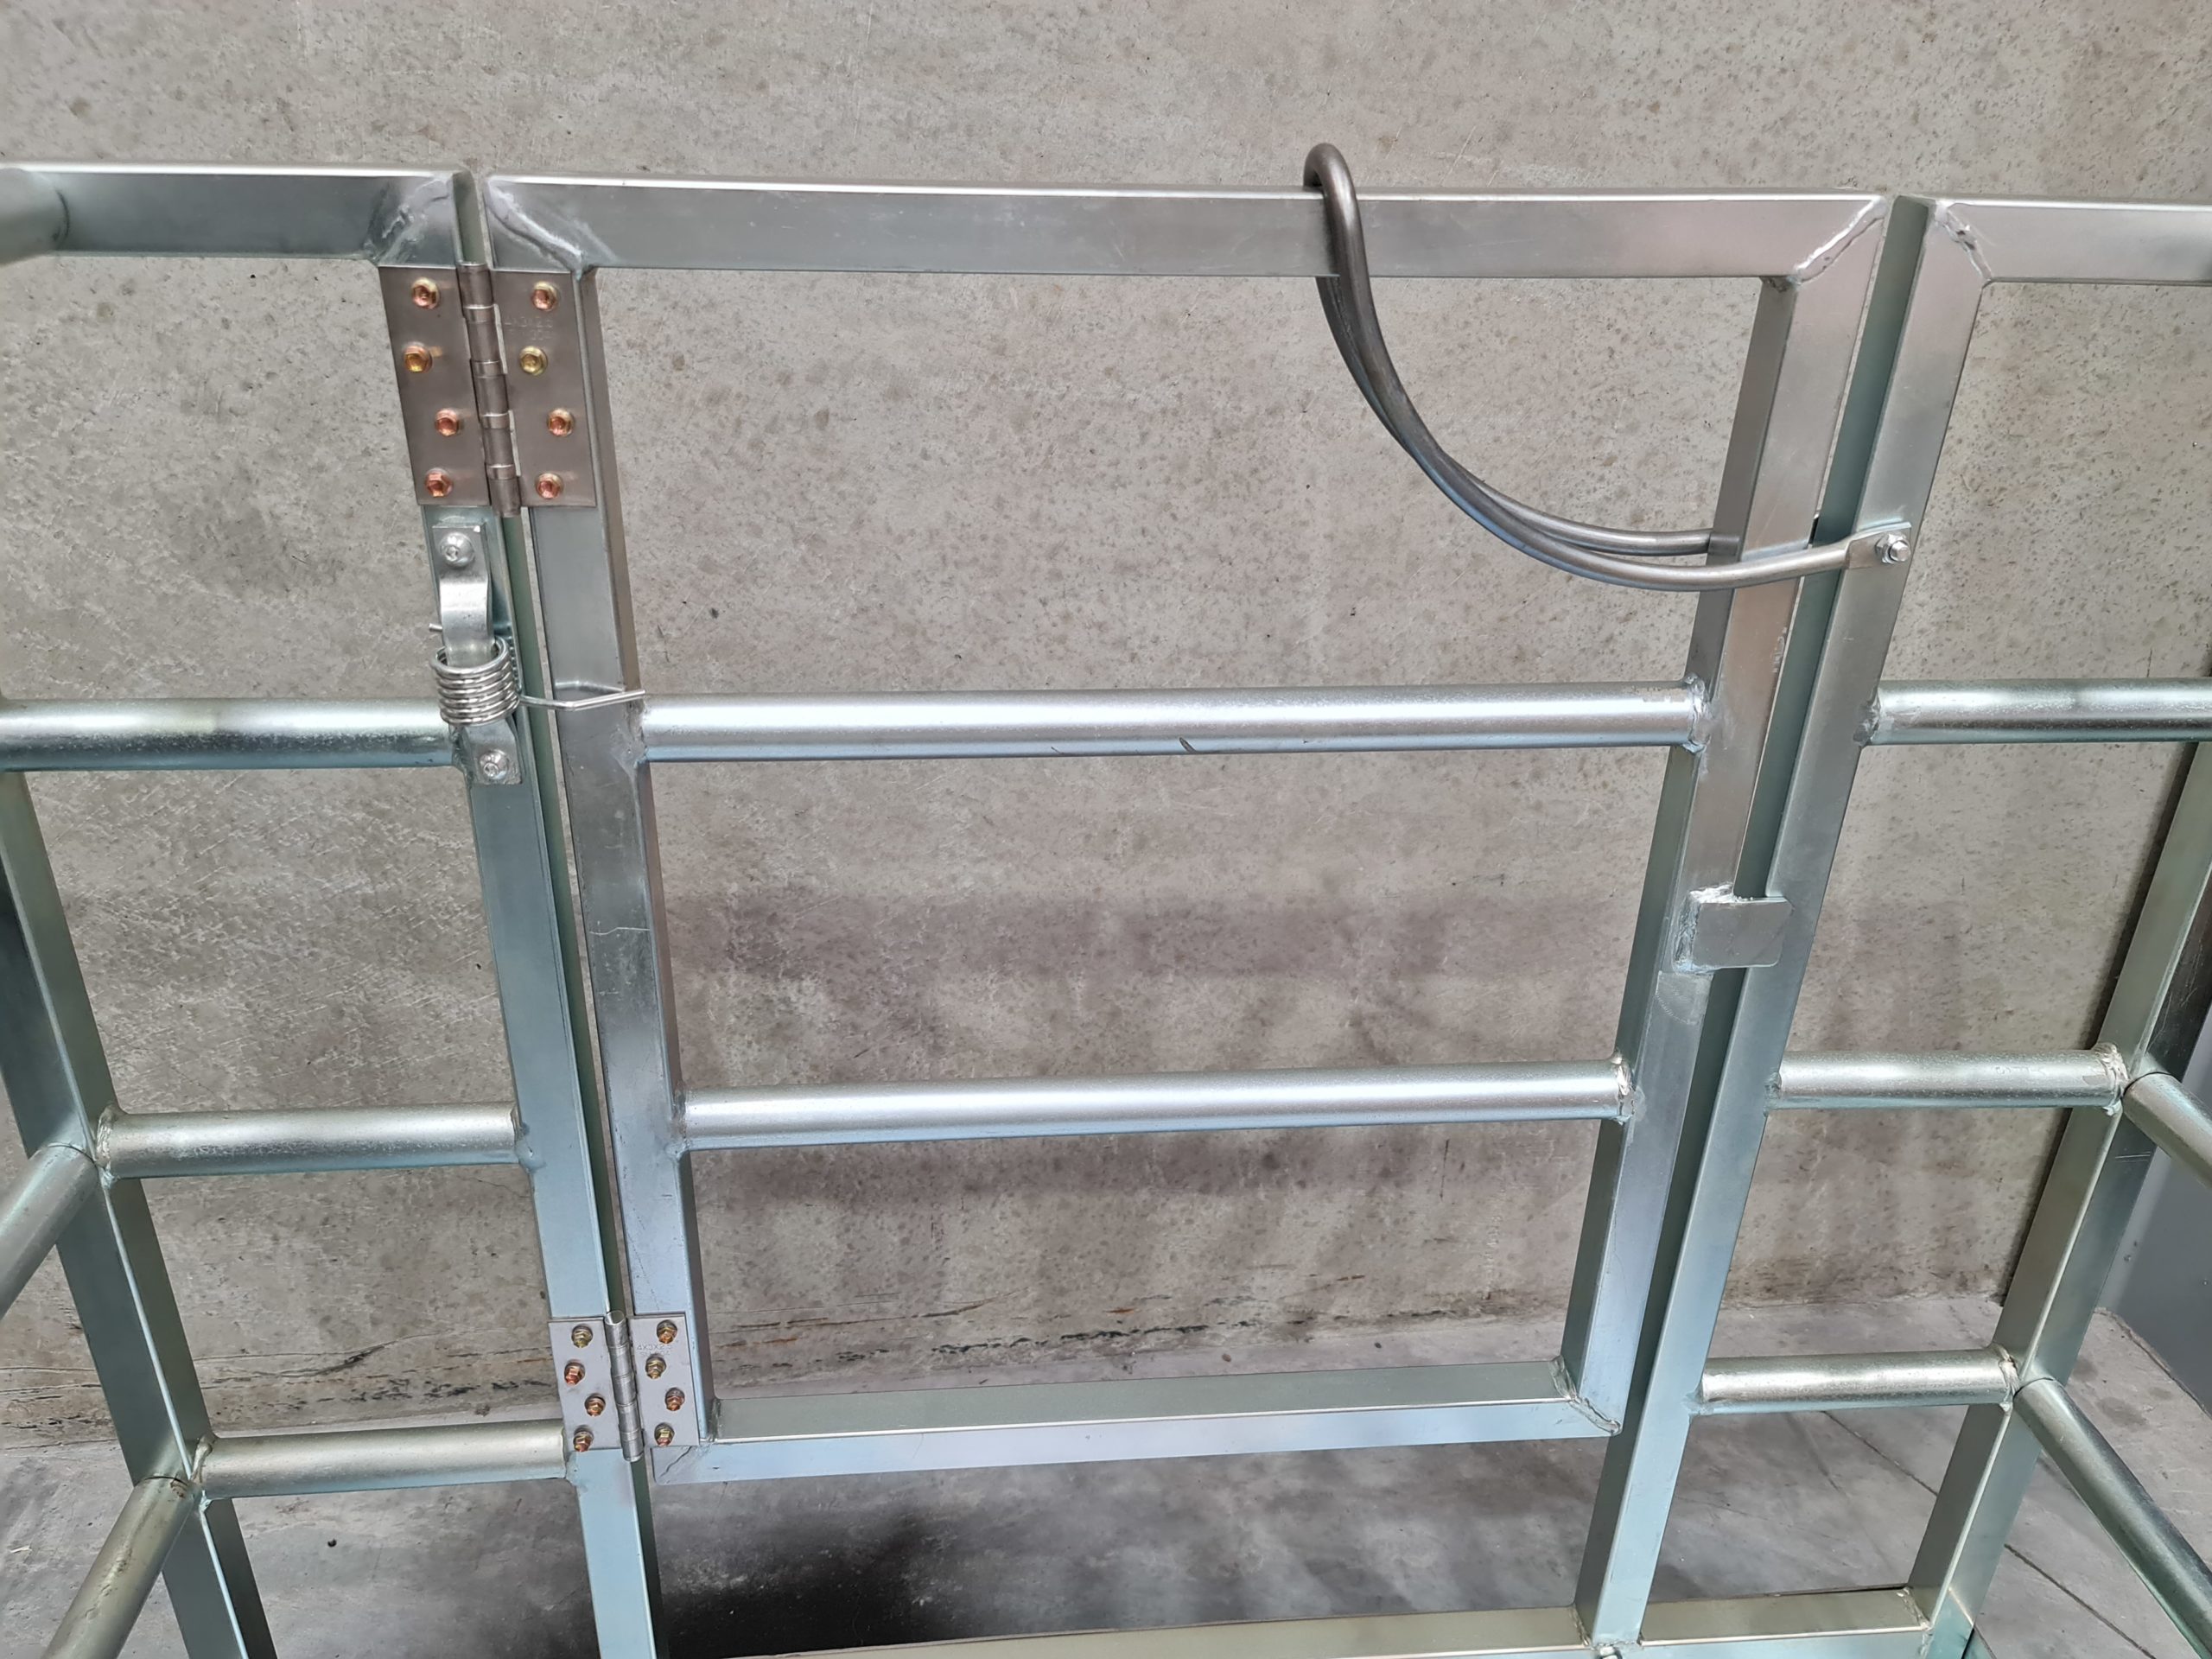 Man Cage gate spring and latch